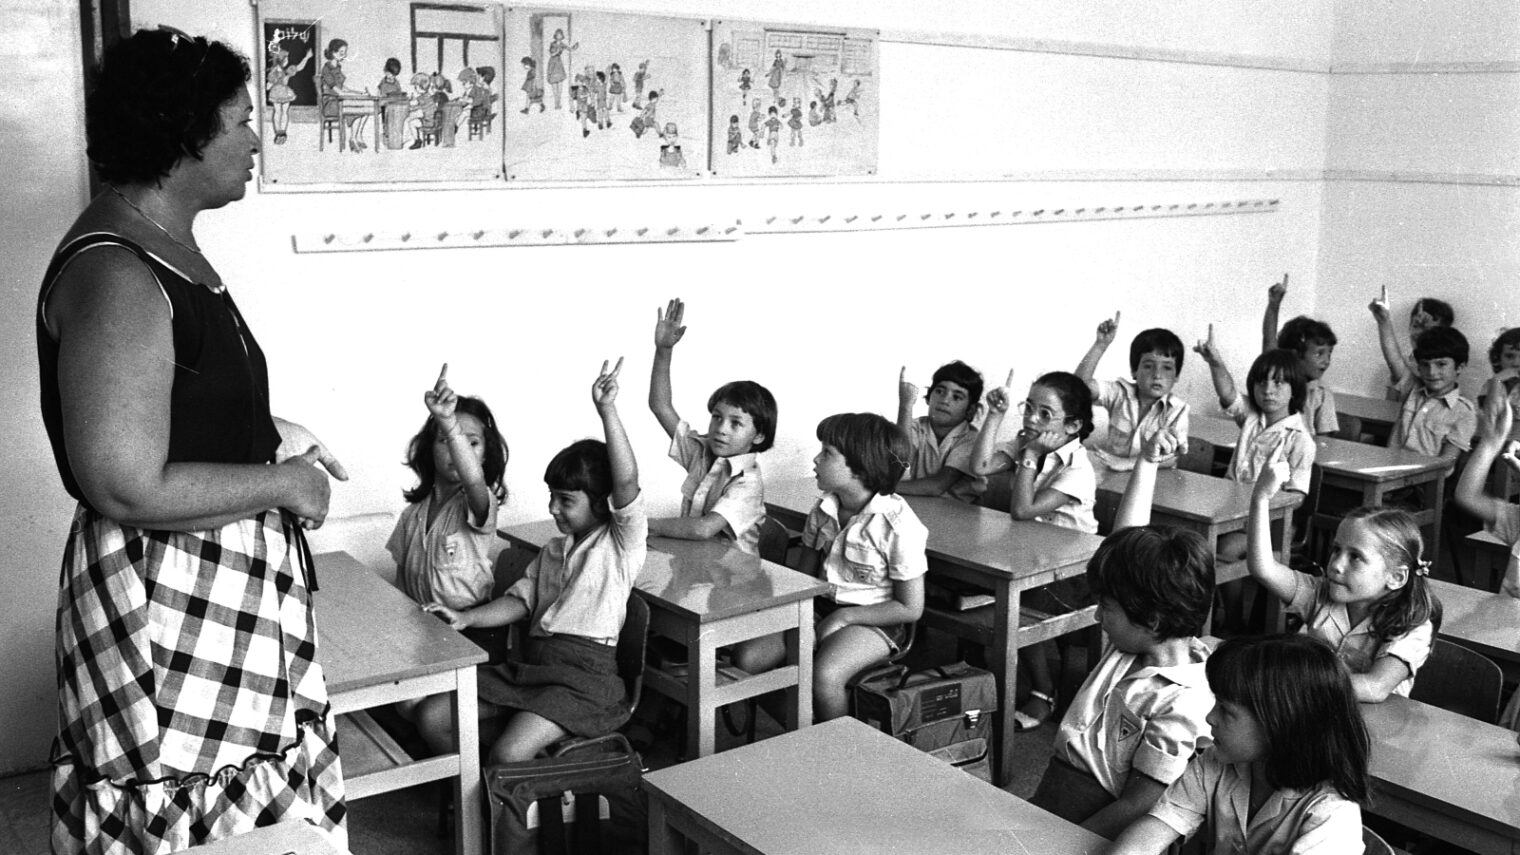 Back to school in Israel, 1981: Who were these first graders and where are they today?Photo courtesy of the Dan Hadani Photo Archive/Pritzker Family National Photography Collection at the National Library of Israel